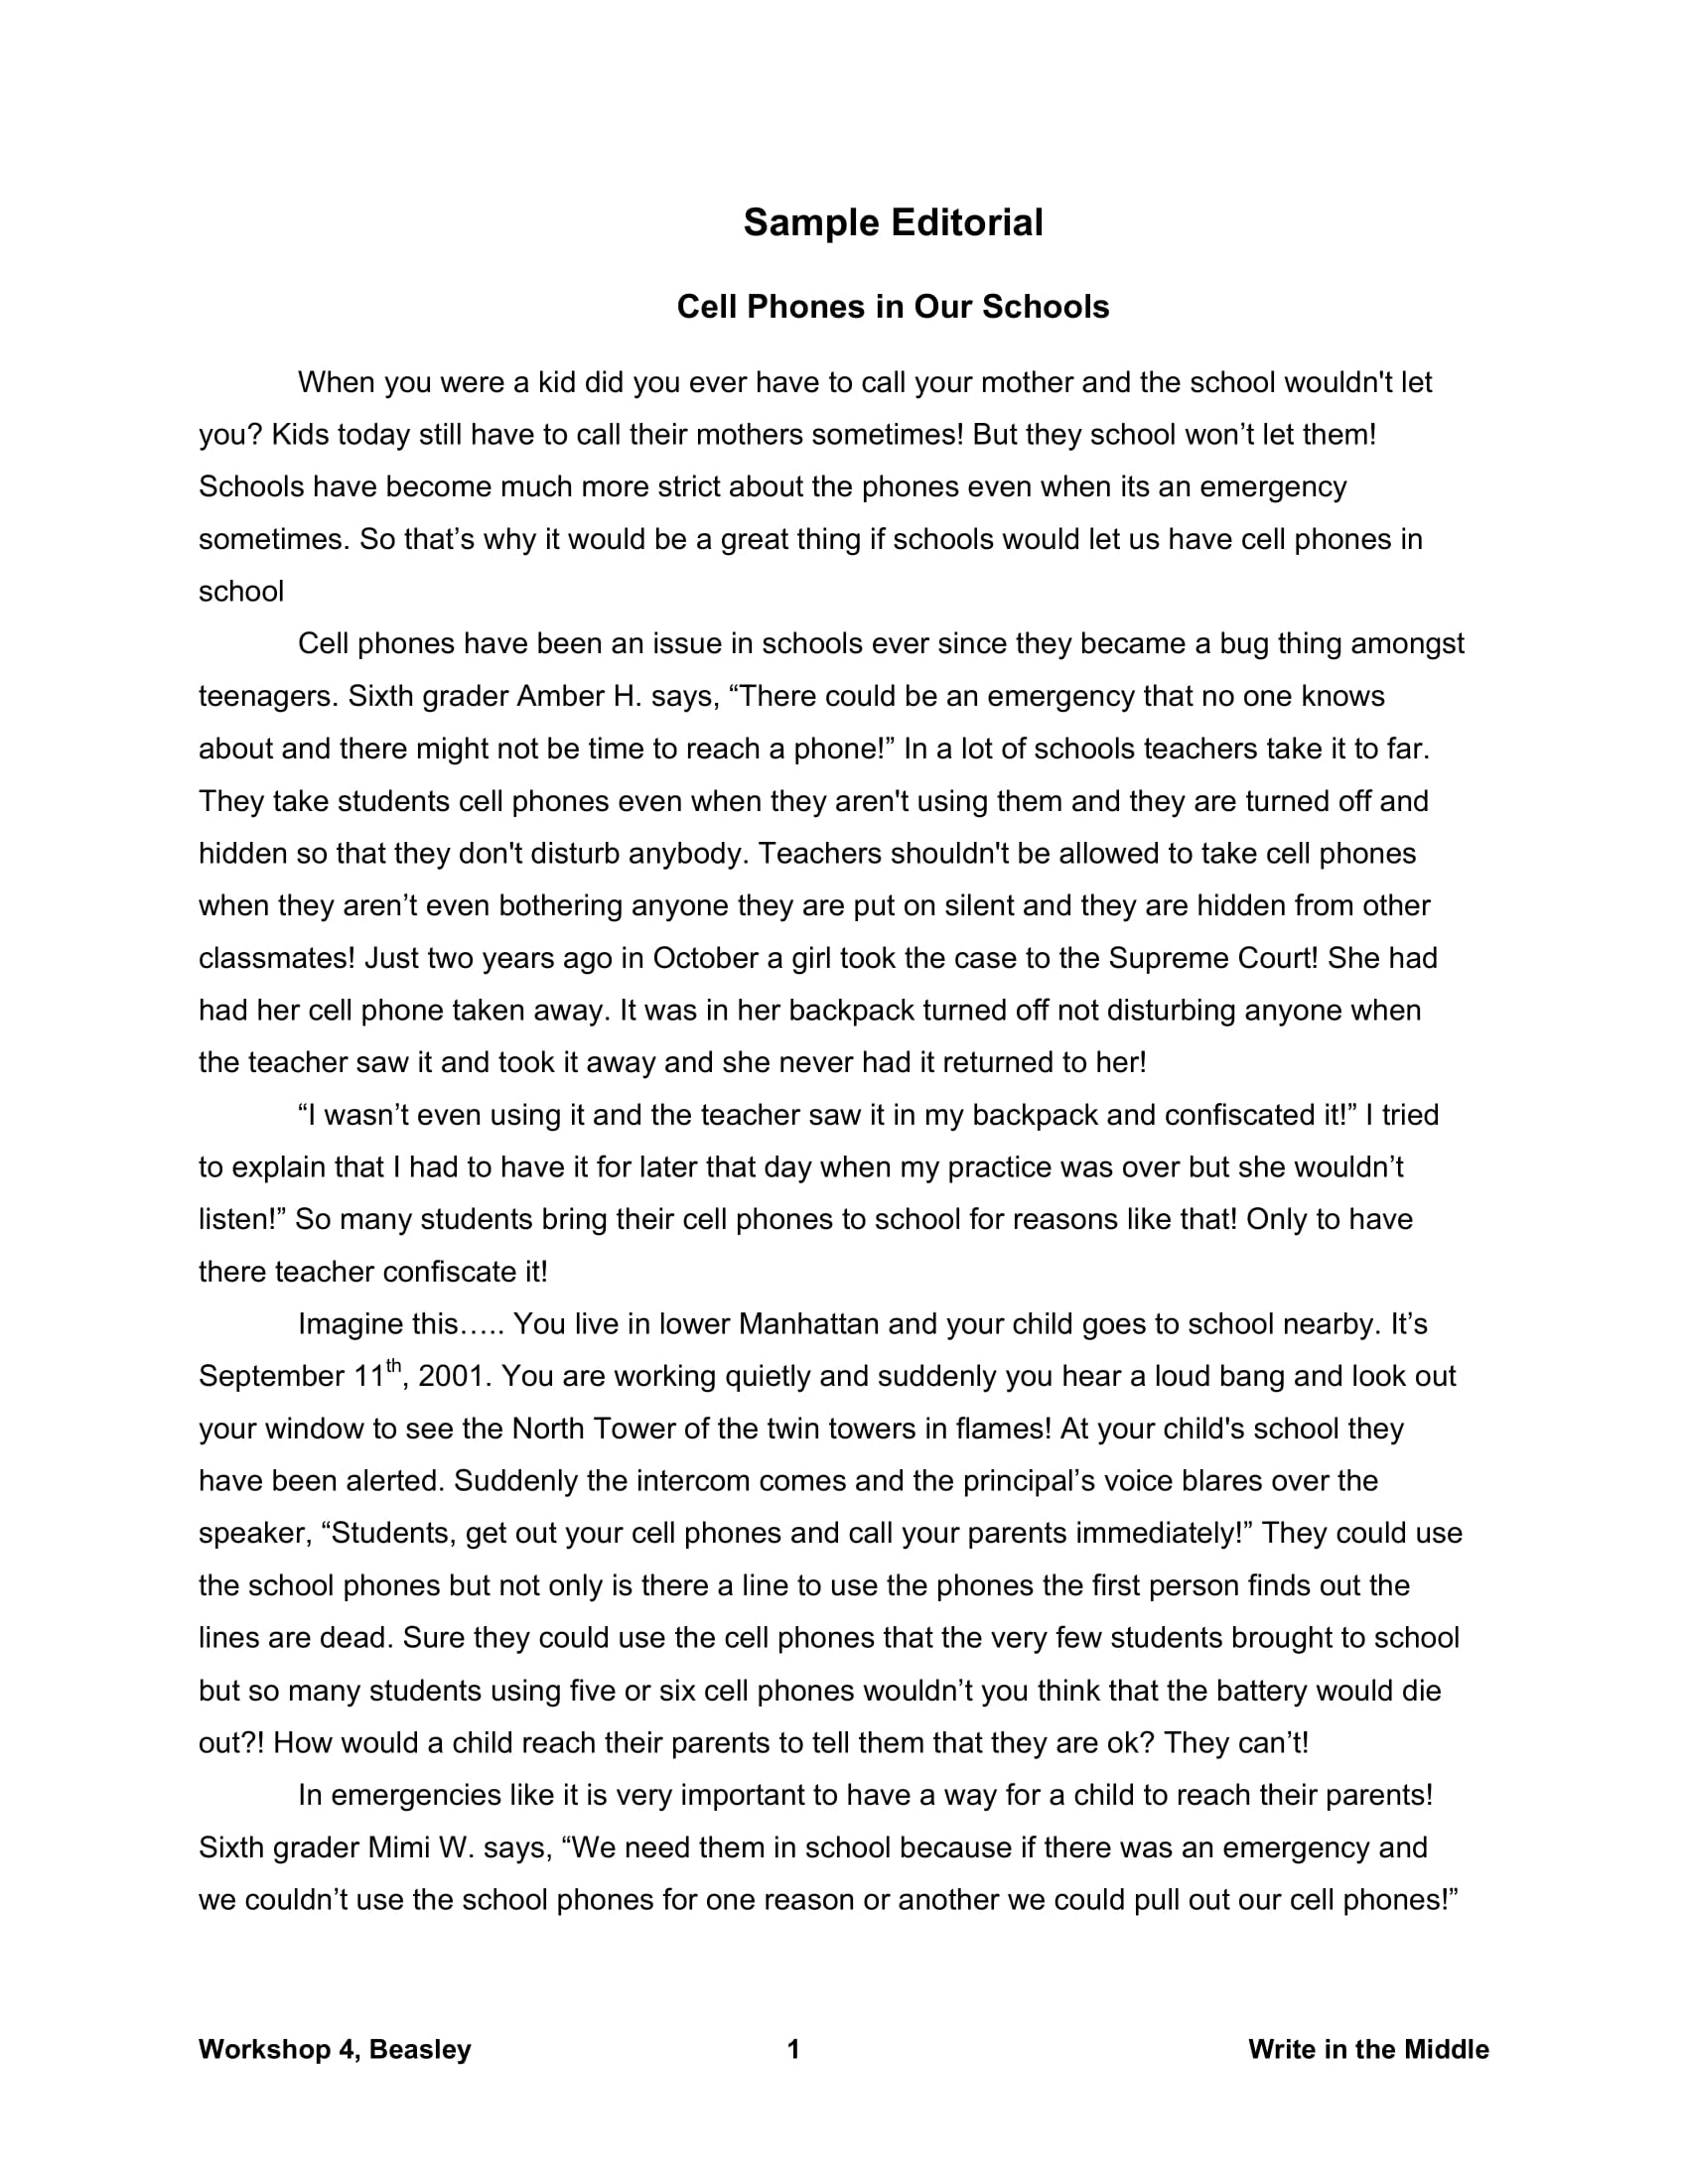 Article Analysis Essay | Bartleby